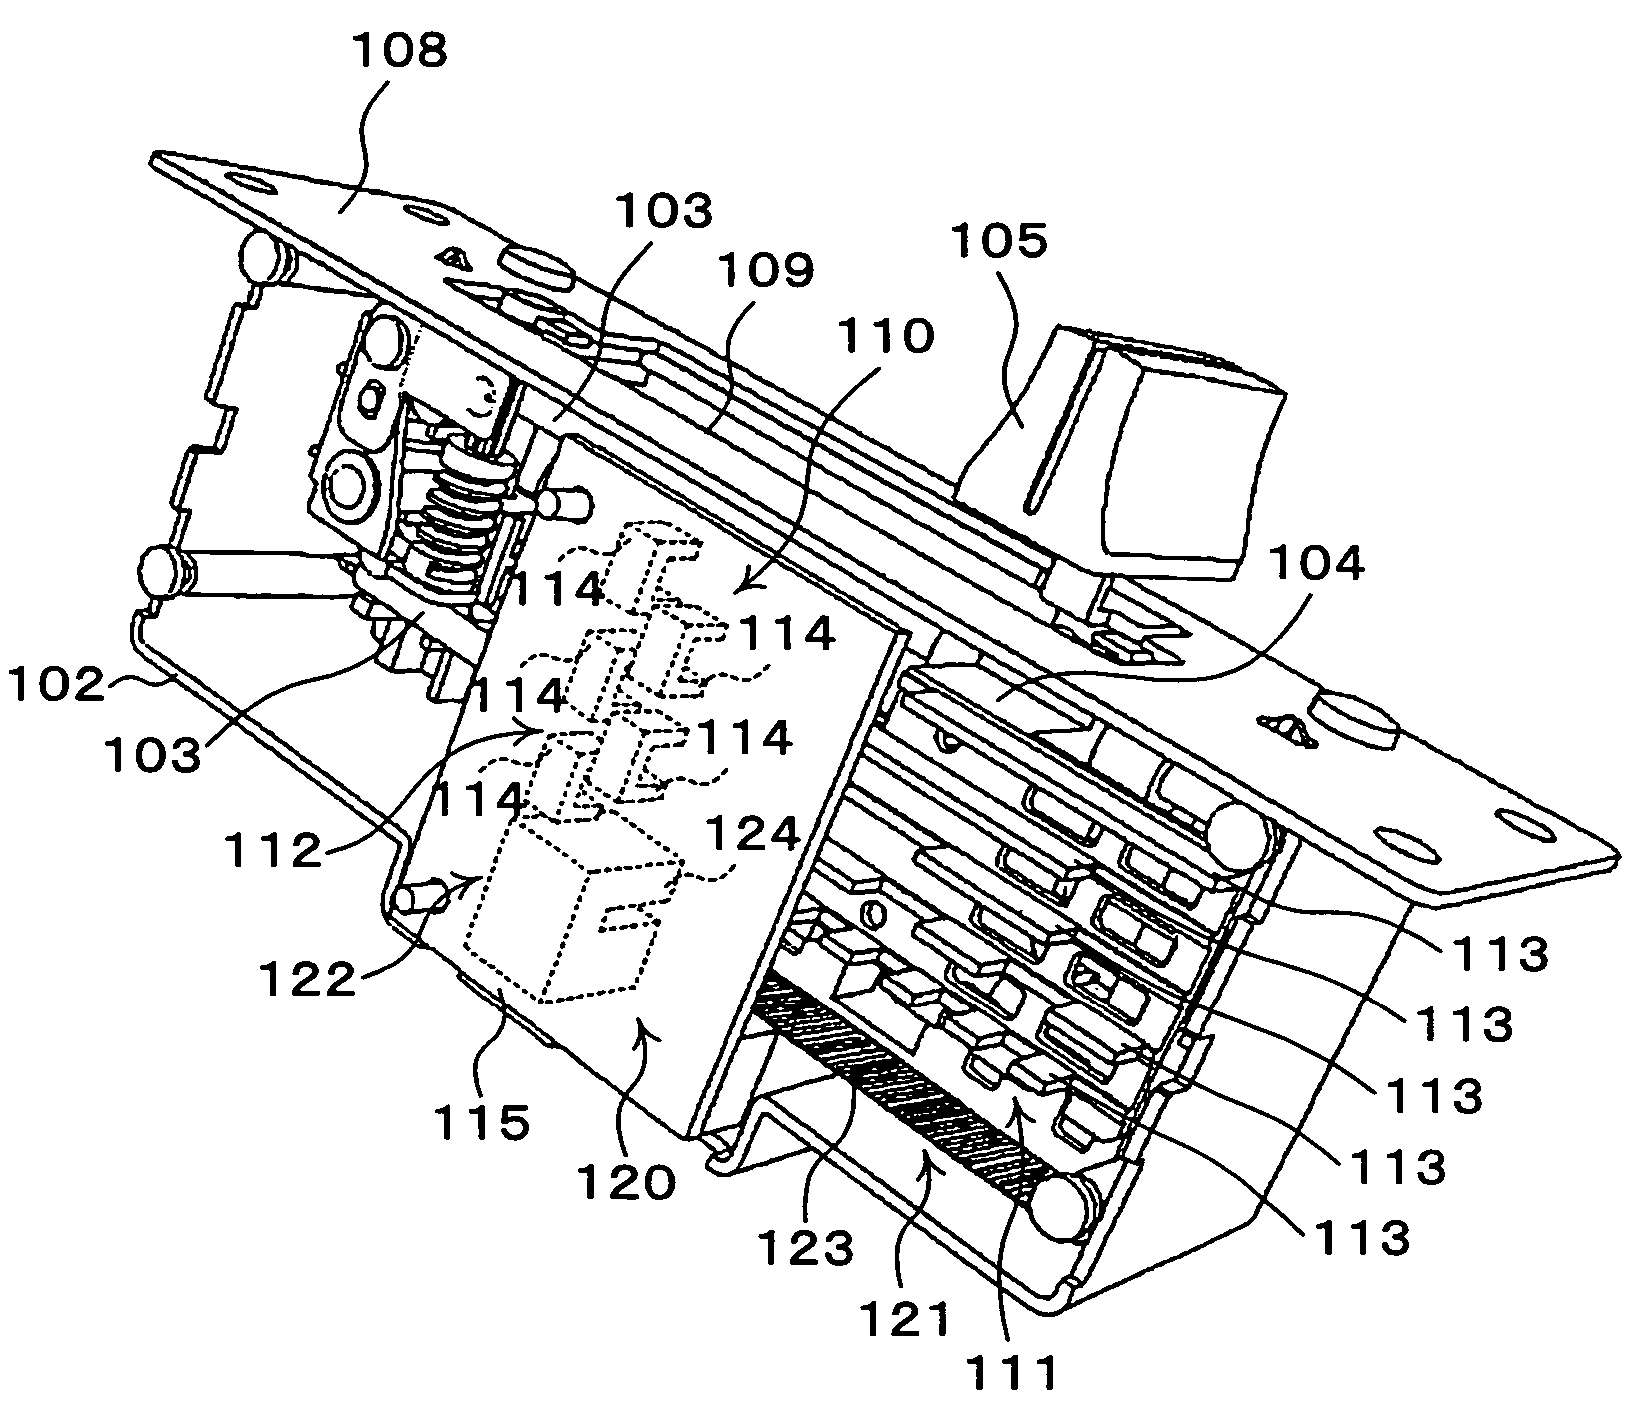 Apparatus for adjusting a signal based on a position of a movable member